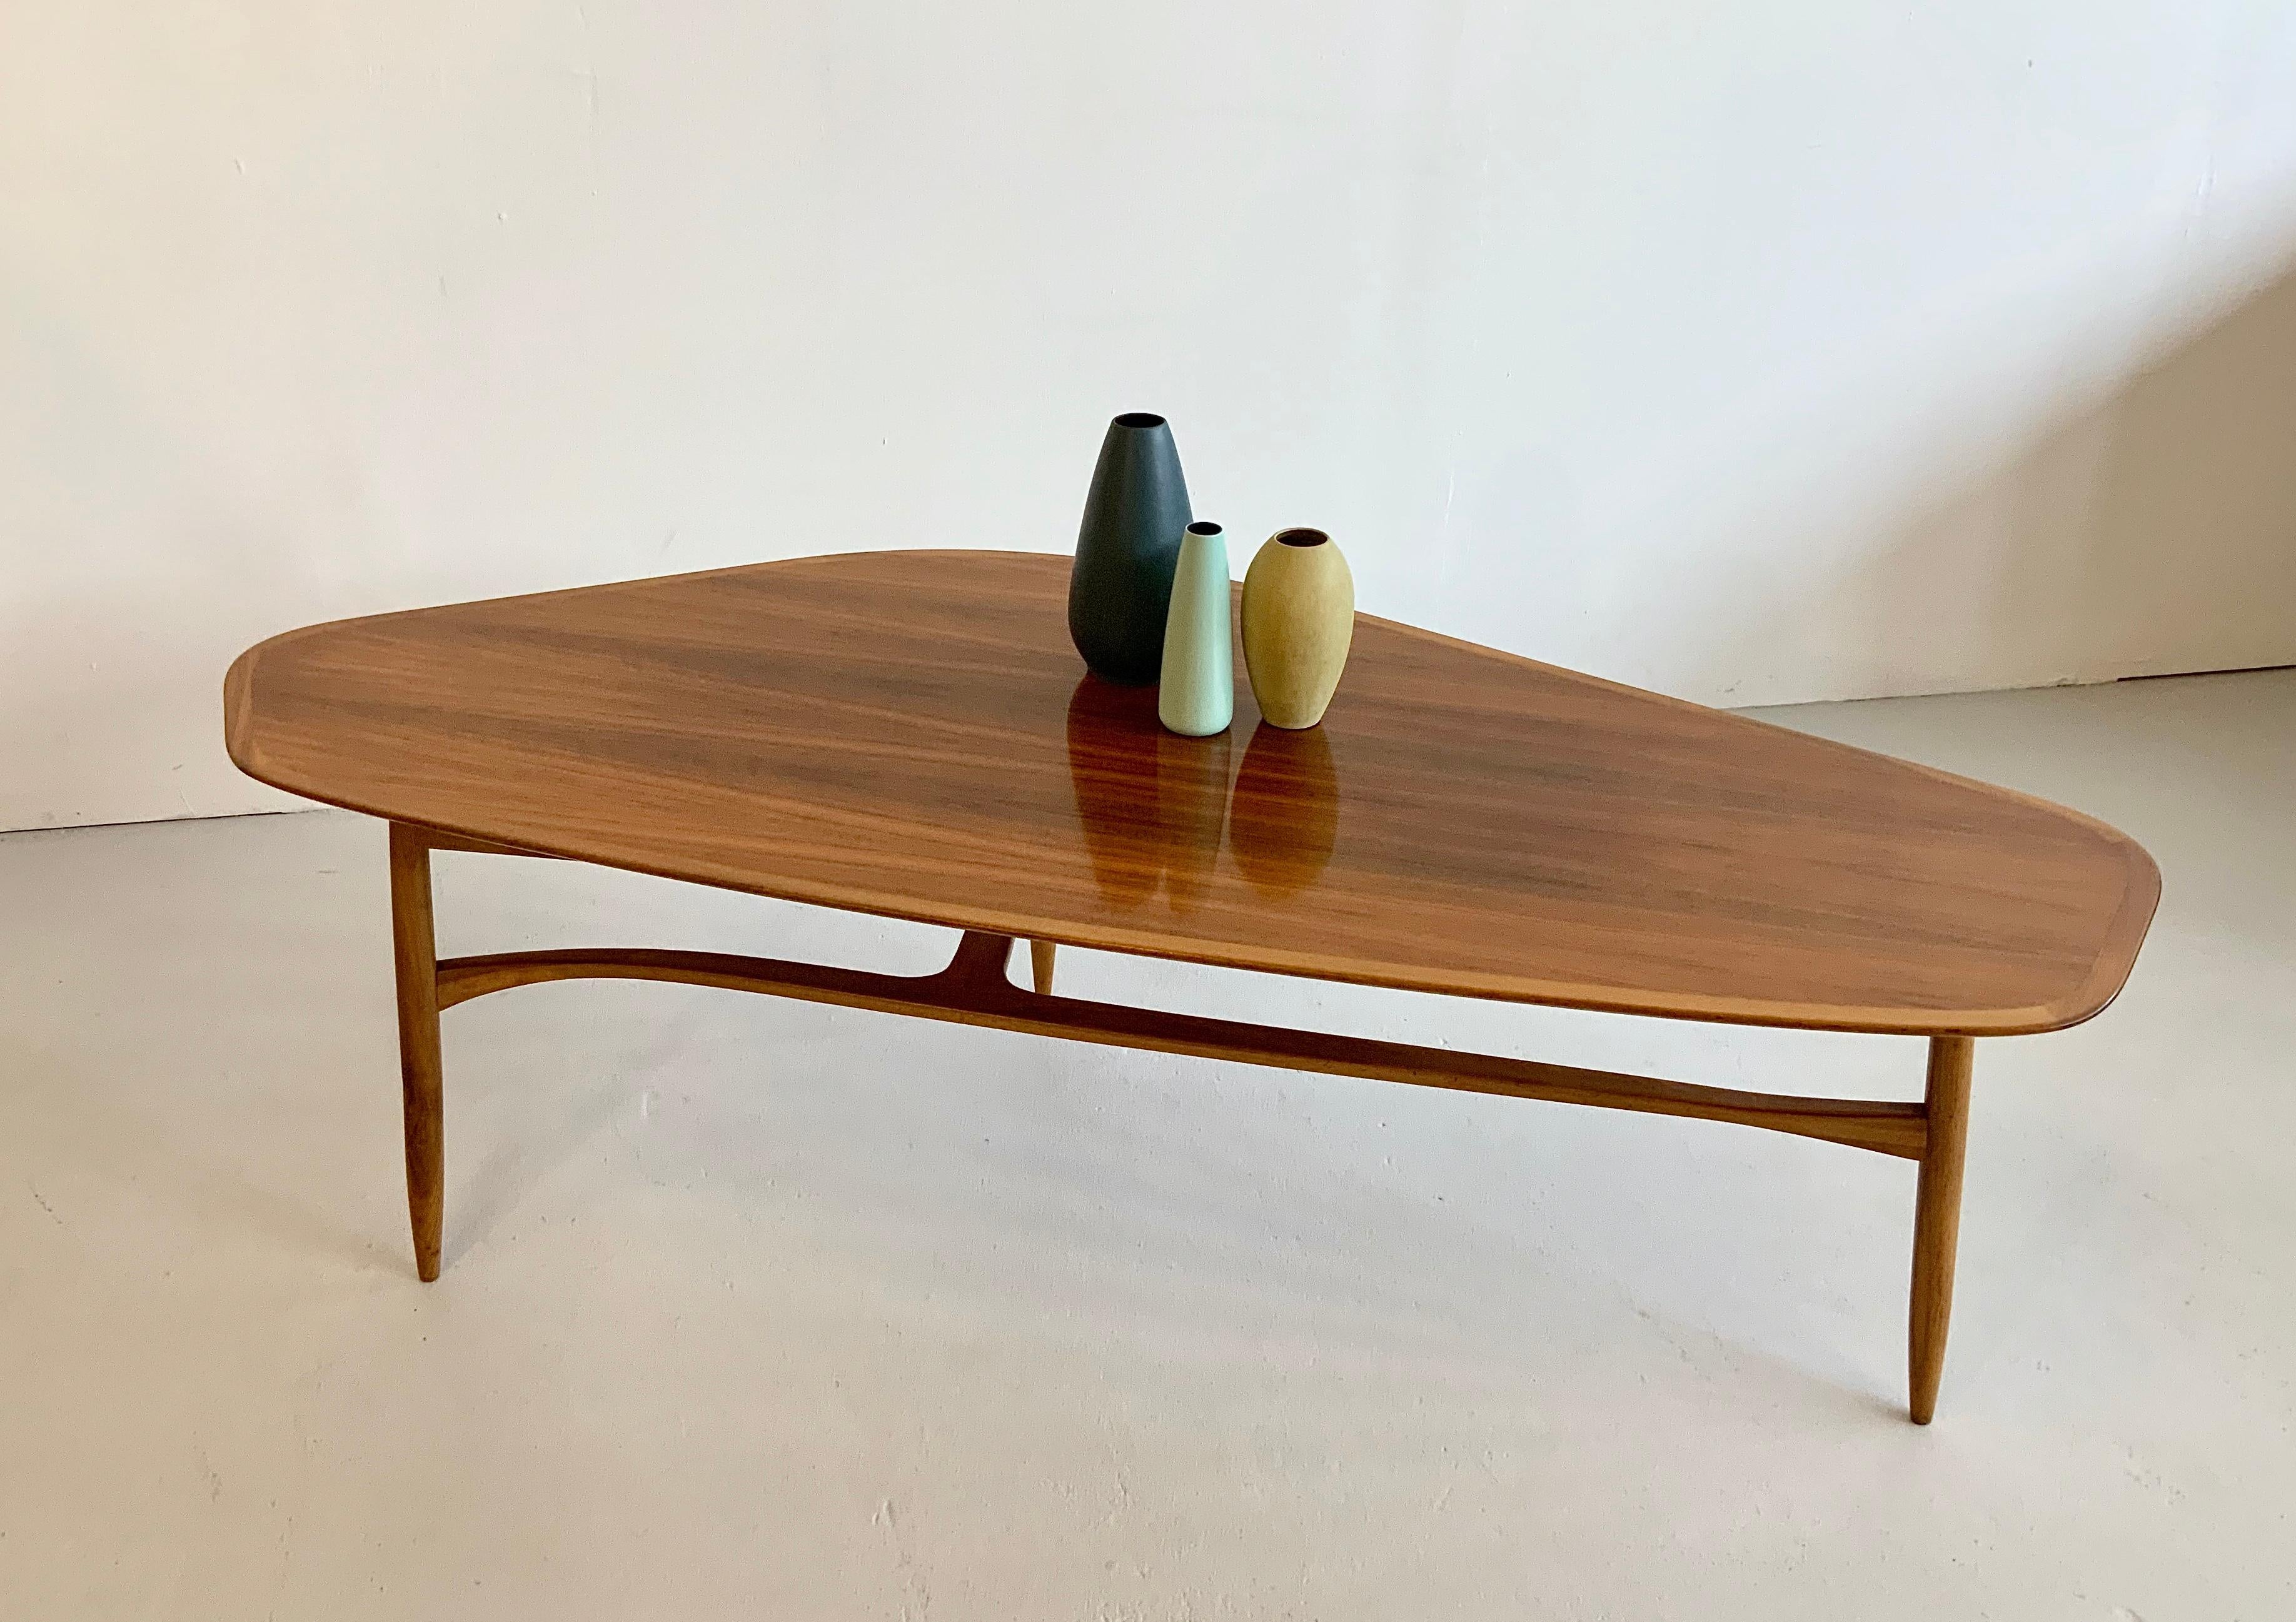 Swedish Large Svante Skogh for Laauser Midcentury Walnut Curved Coffee Table, 1950s For Sale